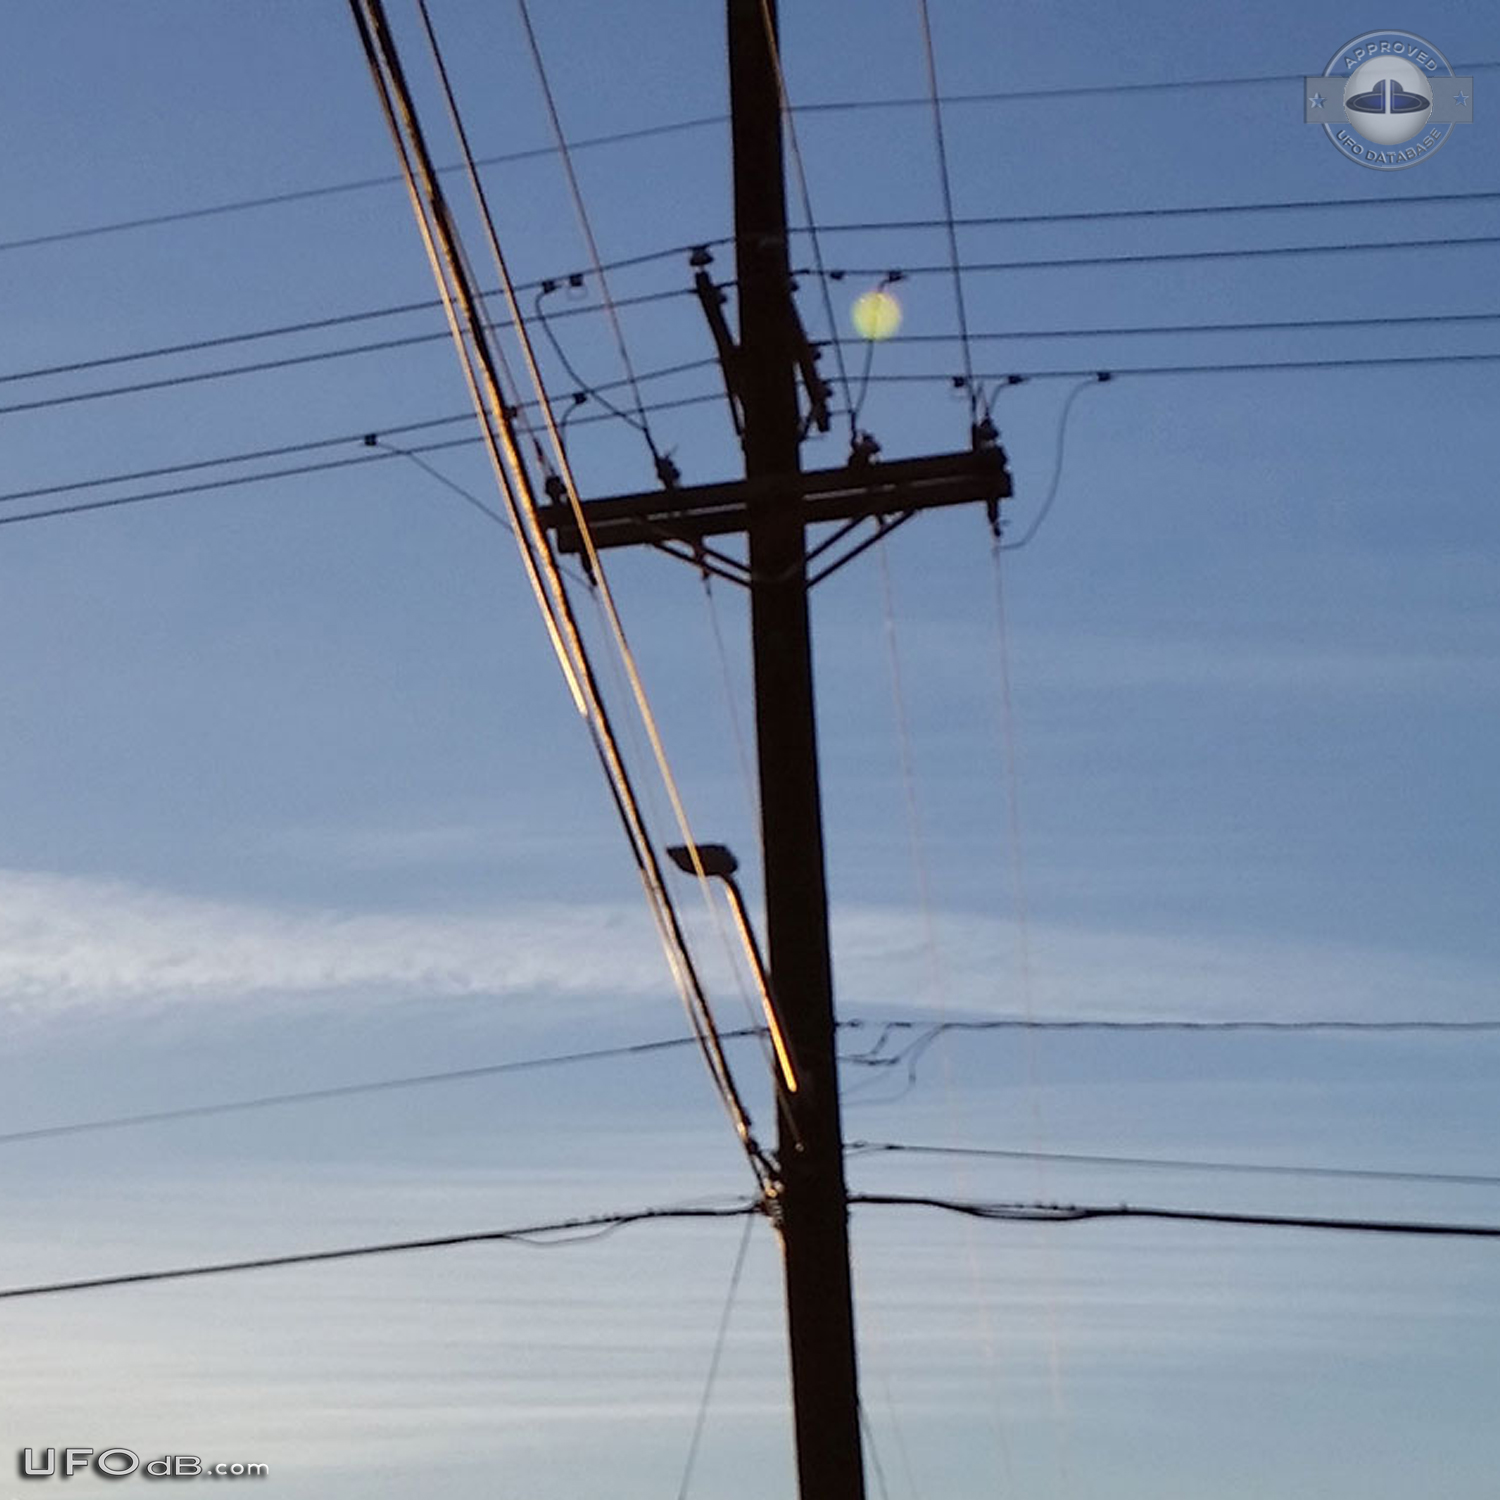 After feeling ET presence Orb UFO seen on Picture Salt Lake City 2015 UFO Picture #638-2